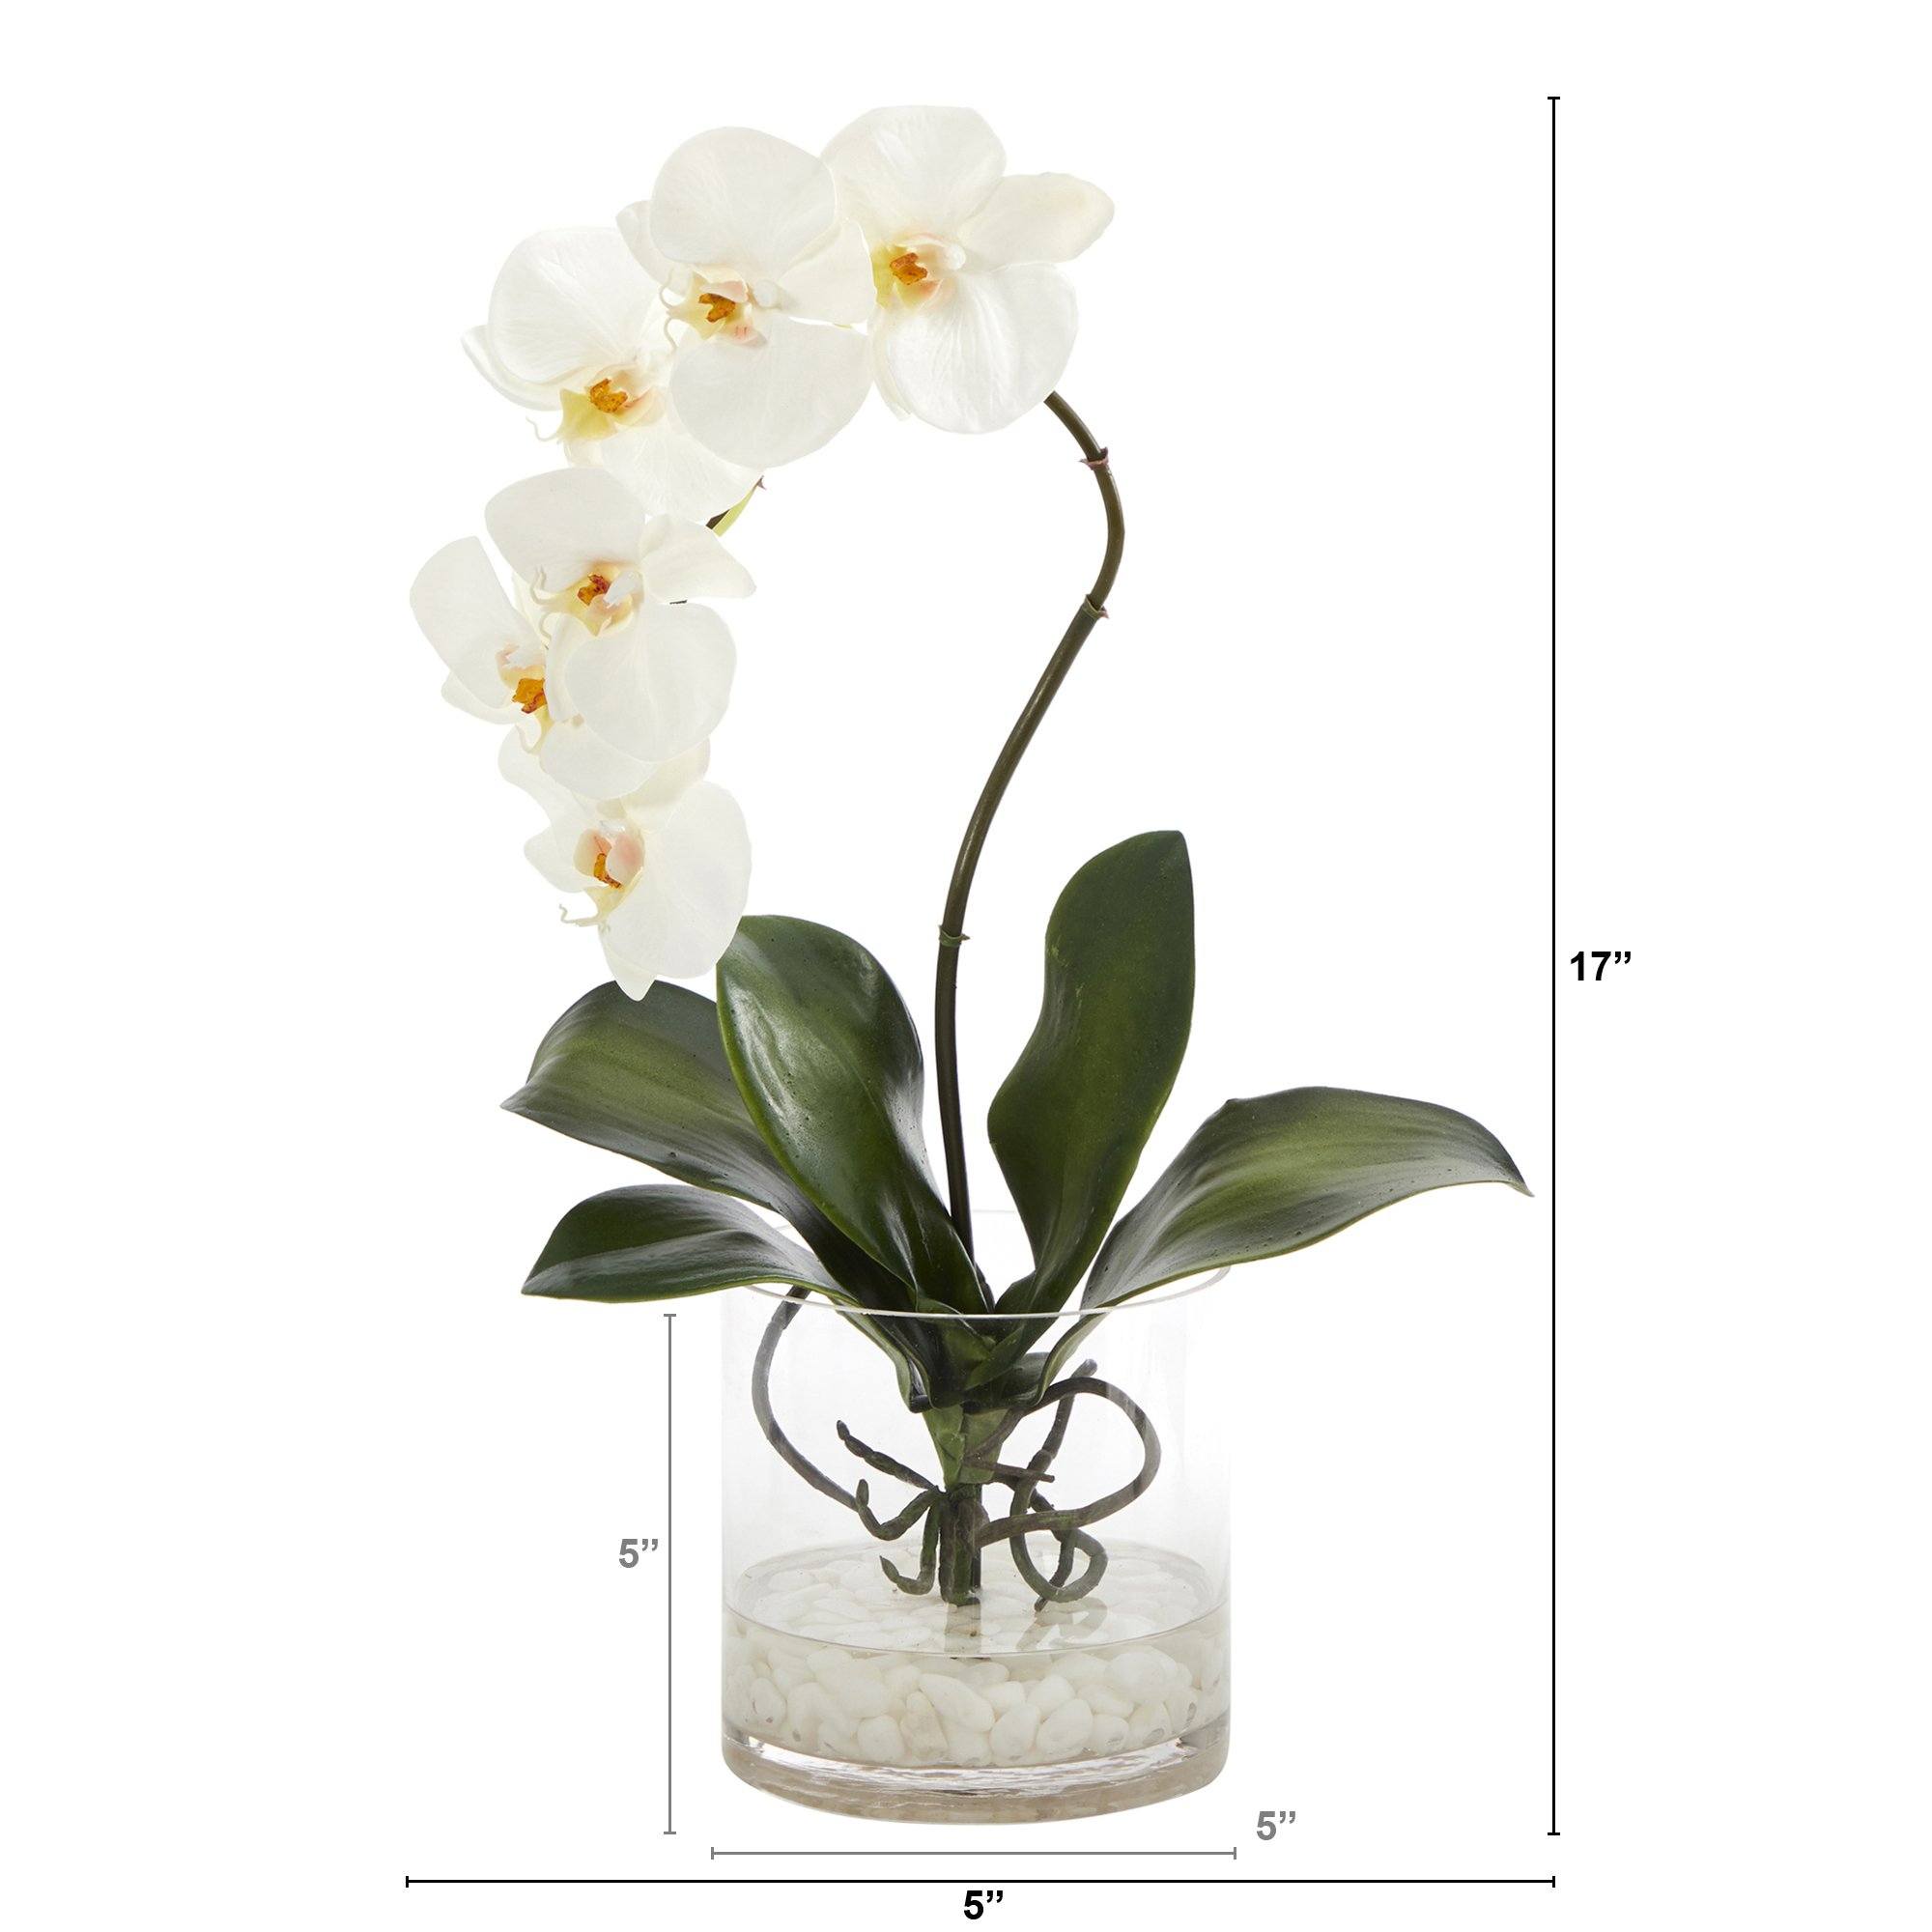 17” Phalaenopsis Orchid Artificial Arrangement In Glass Vase Nearly Natural